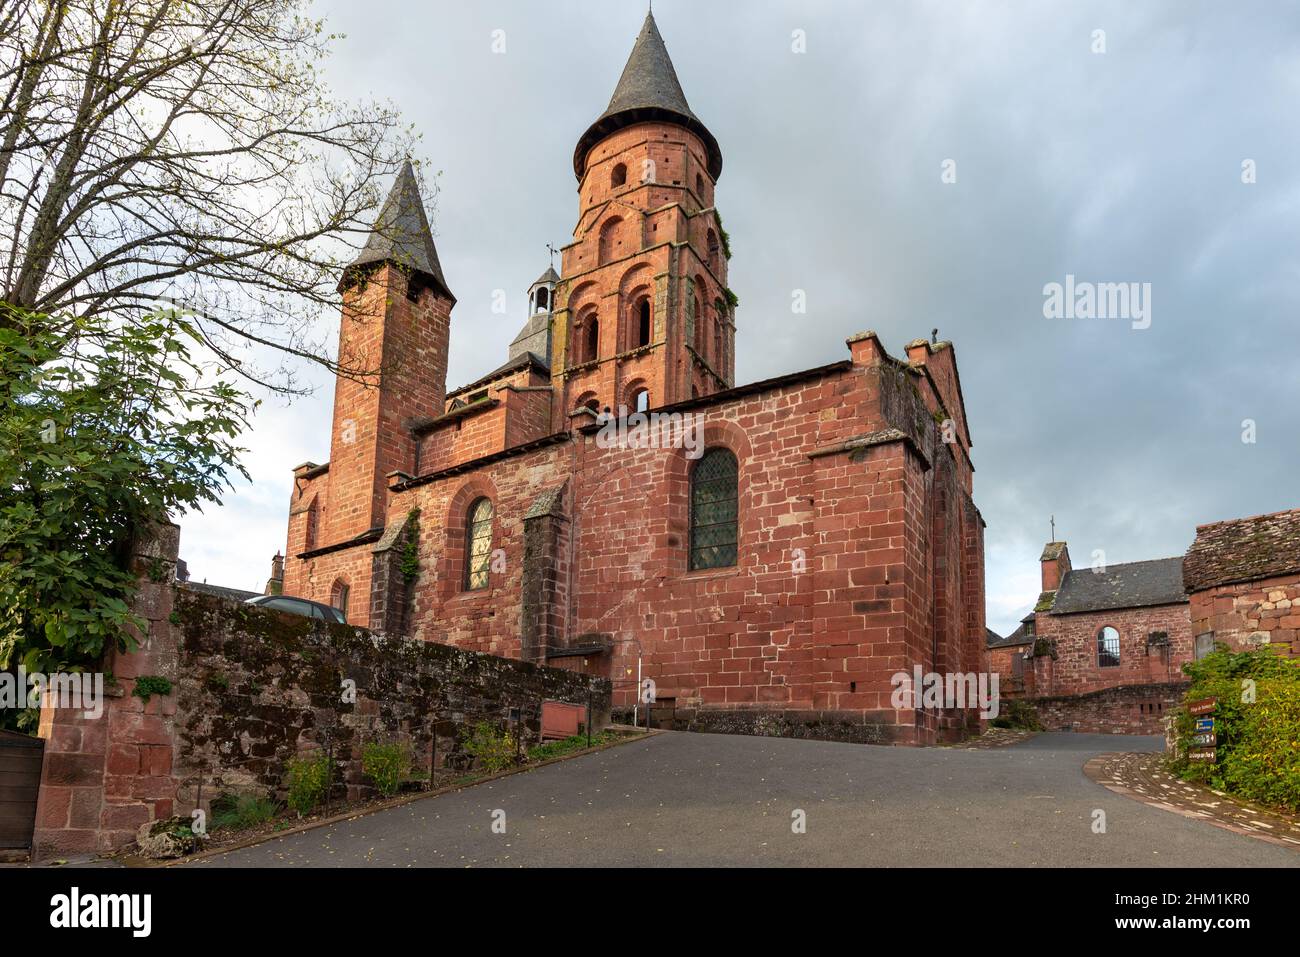 A picturesque and intricate red stone Roman church in Collonges-la-Rouge,  Correze, France, taken on a partly sunny autumn afternoon with no people. Stock Photo